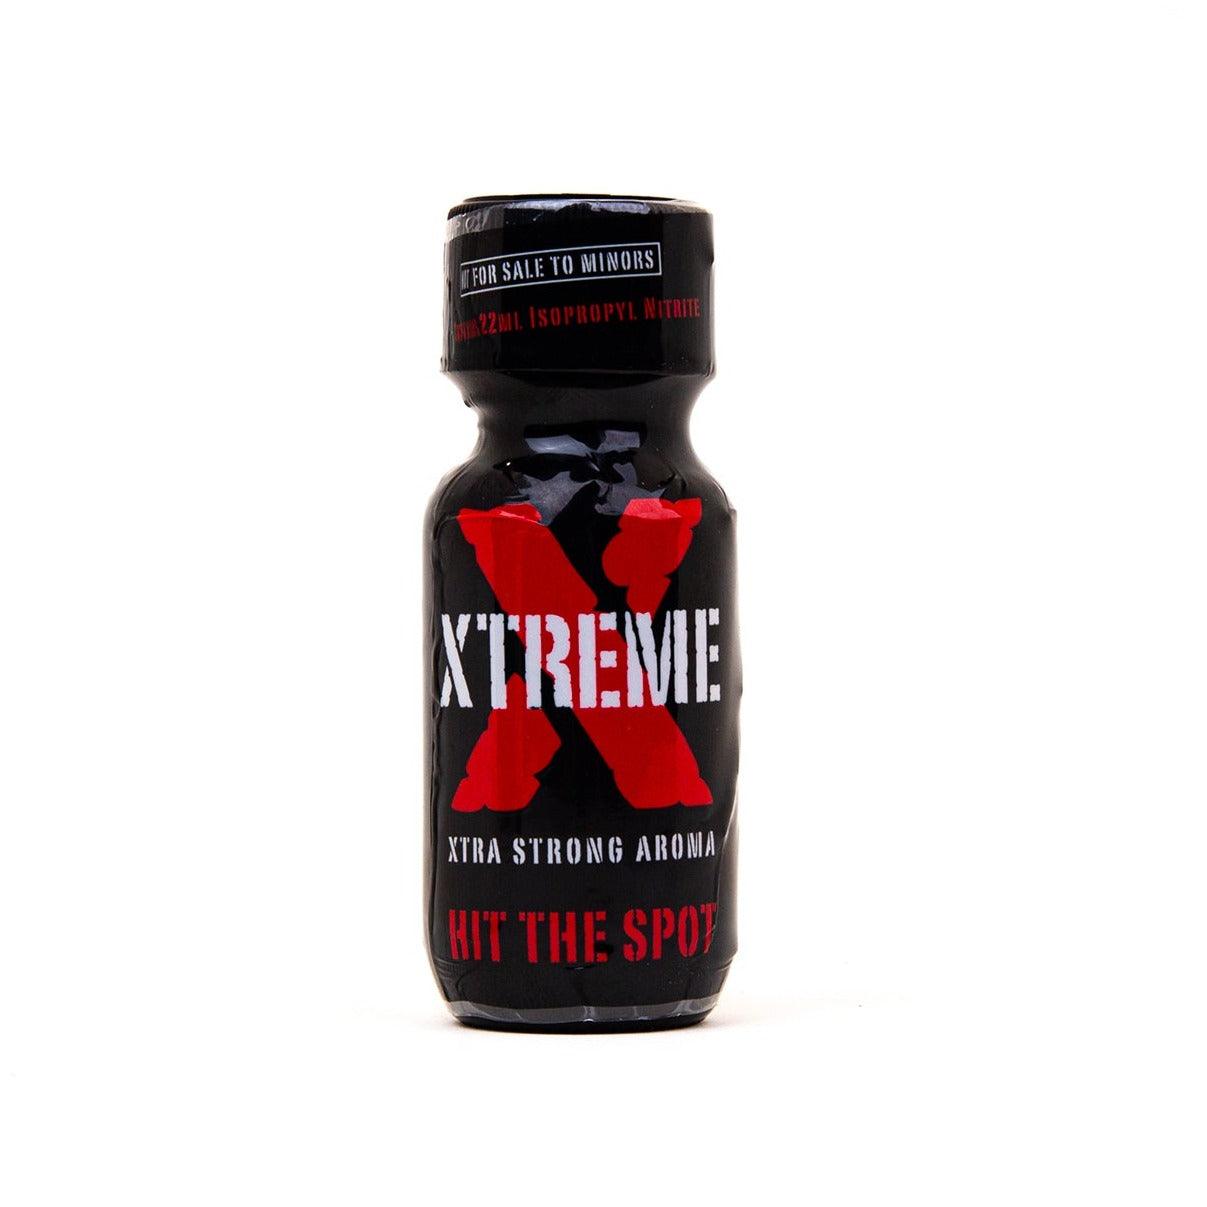 Xtreme Xtra Strong, 25ml by Xtreme